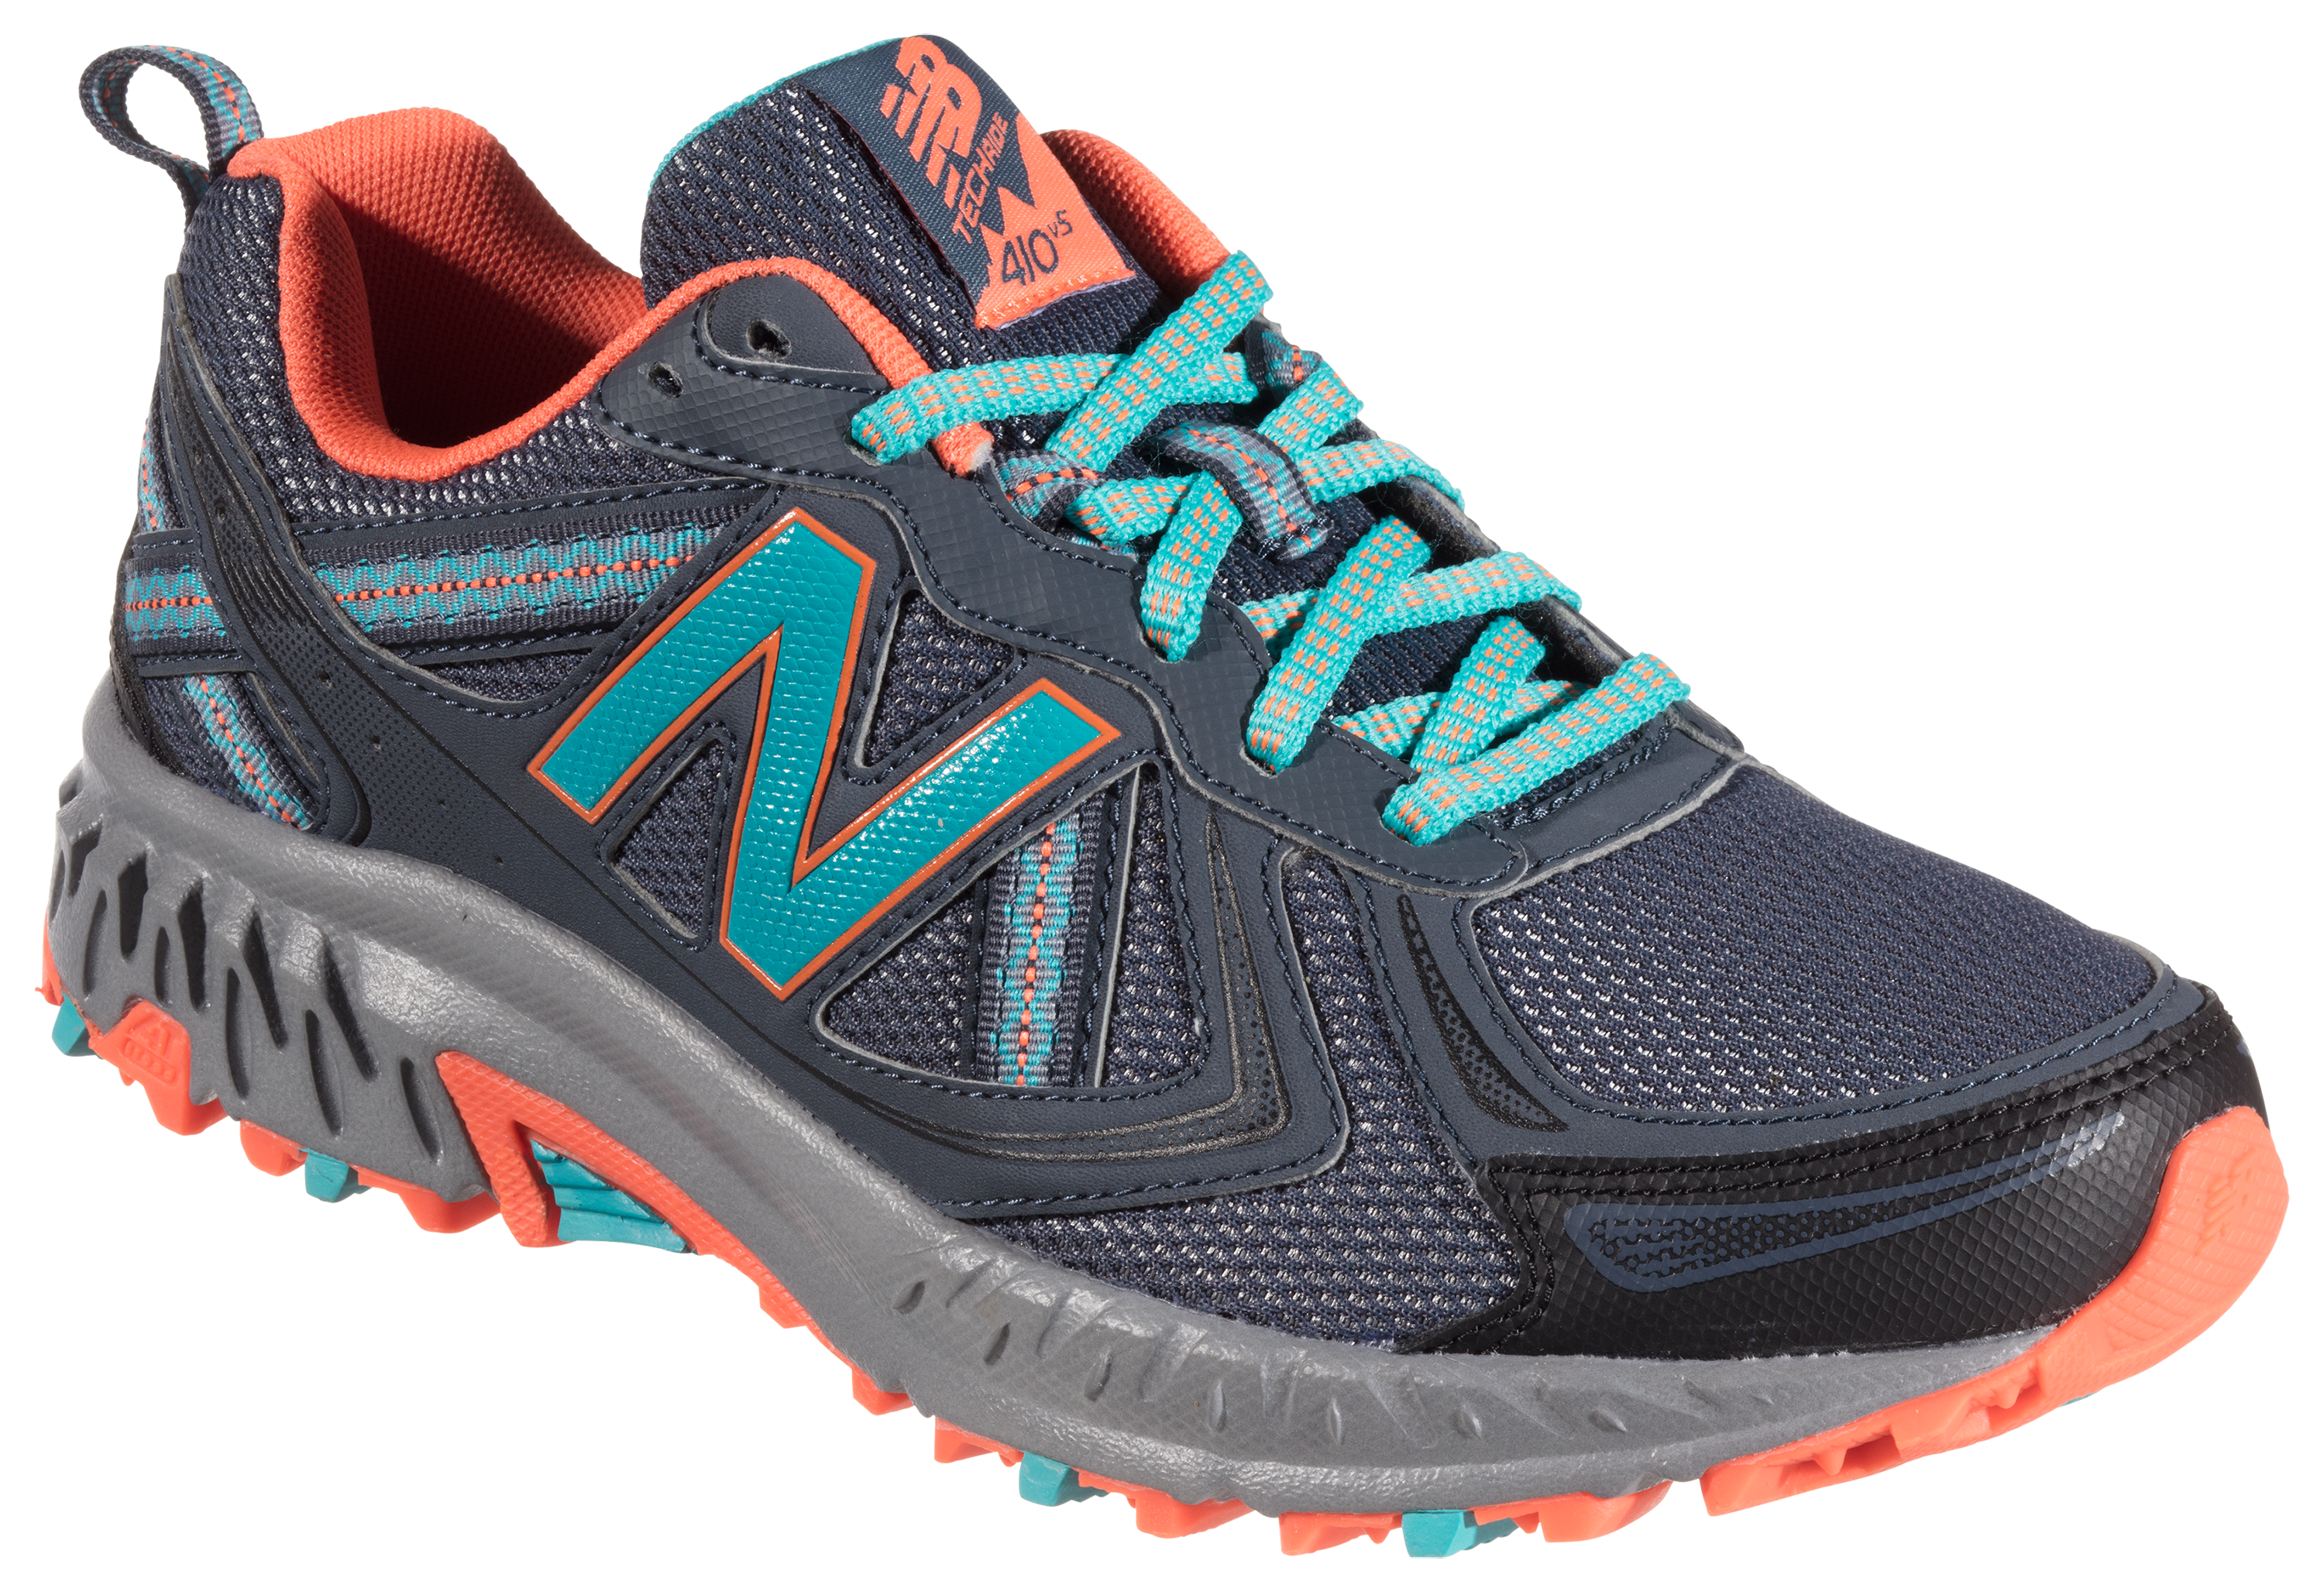 New Balance WT410CV5 Running Shoes for Ladies | Bass Pro Shops